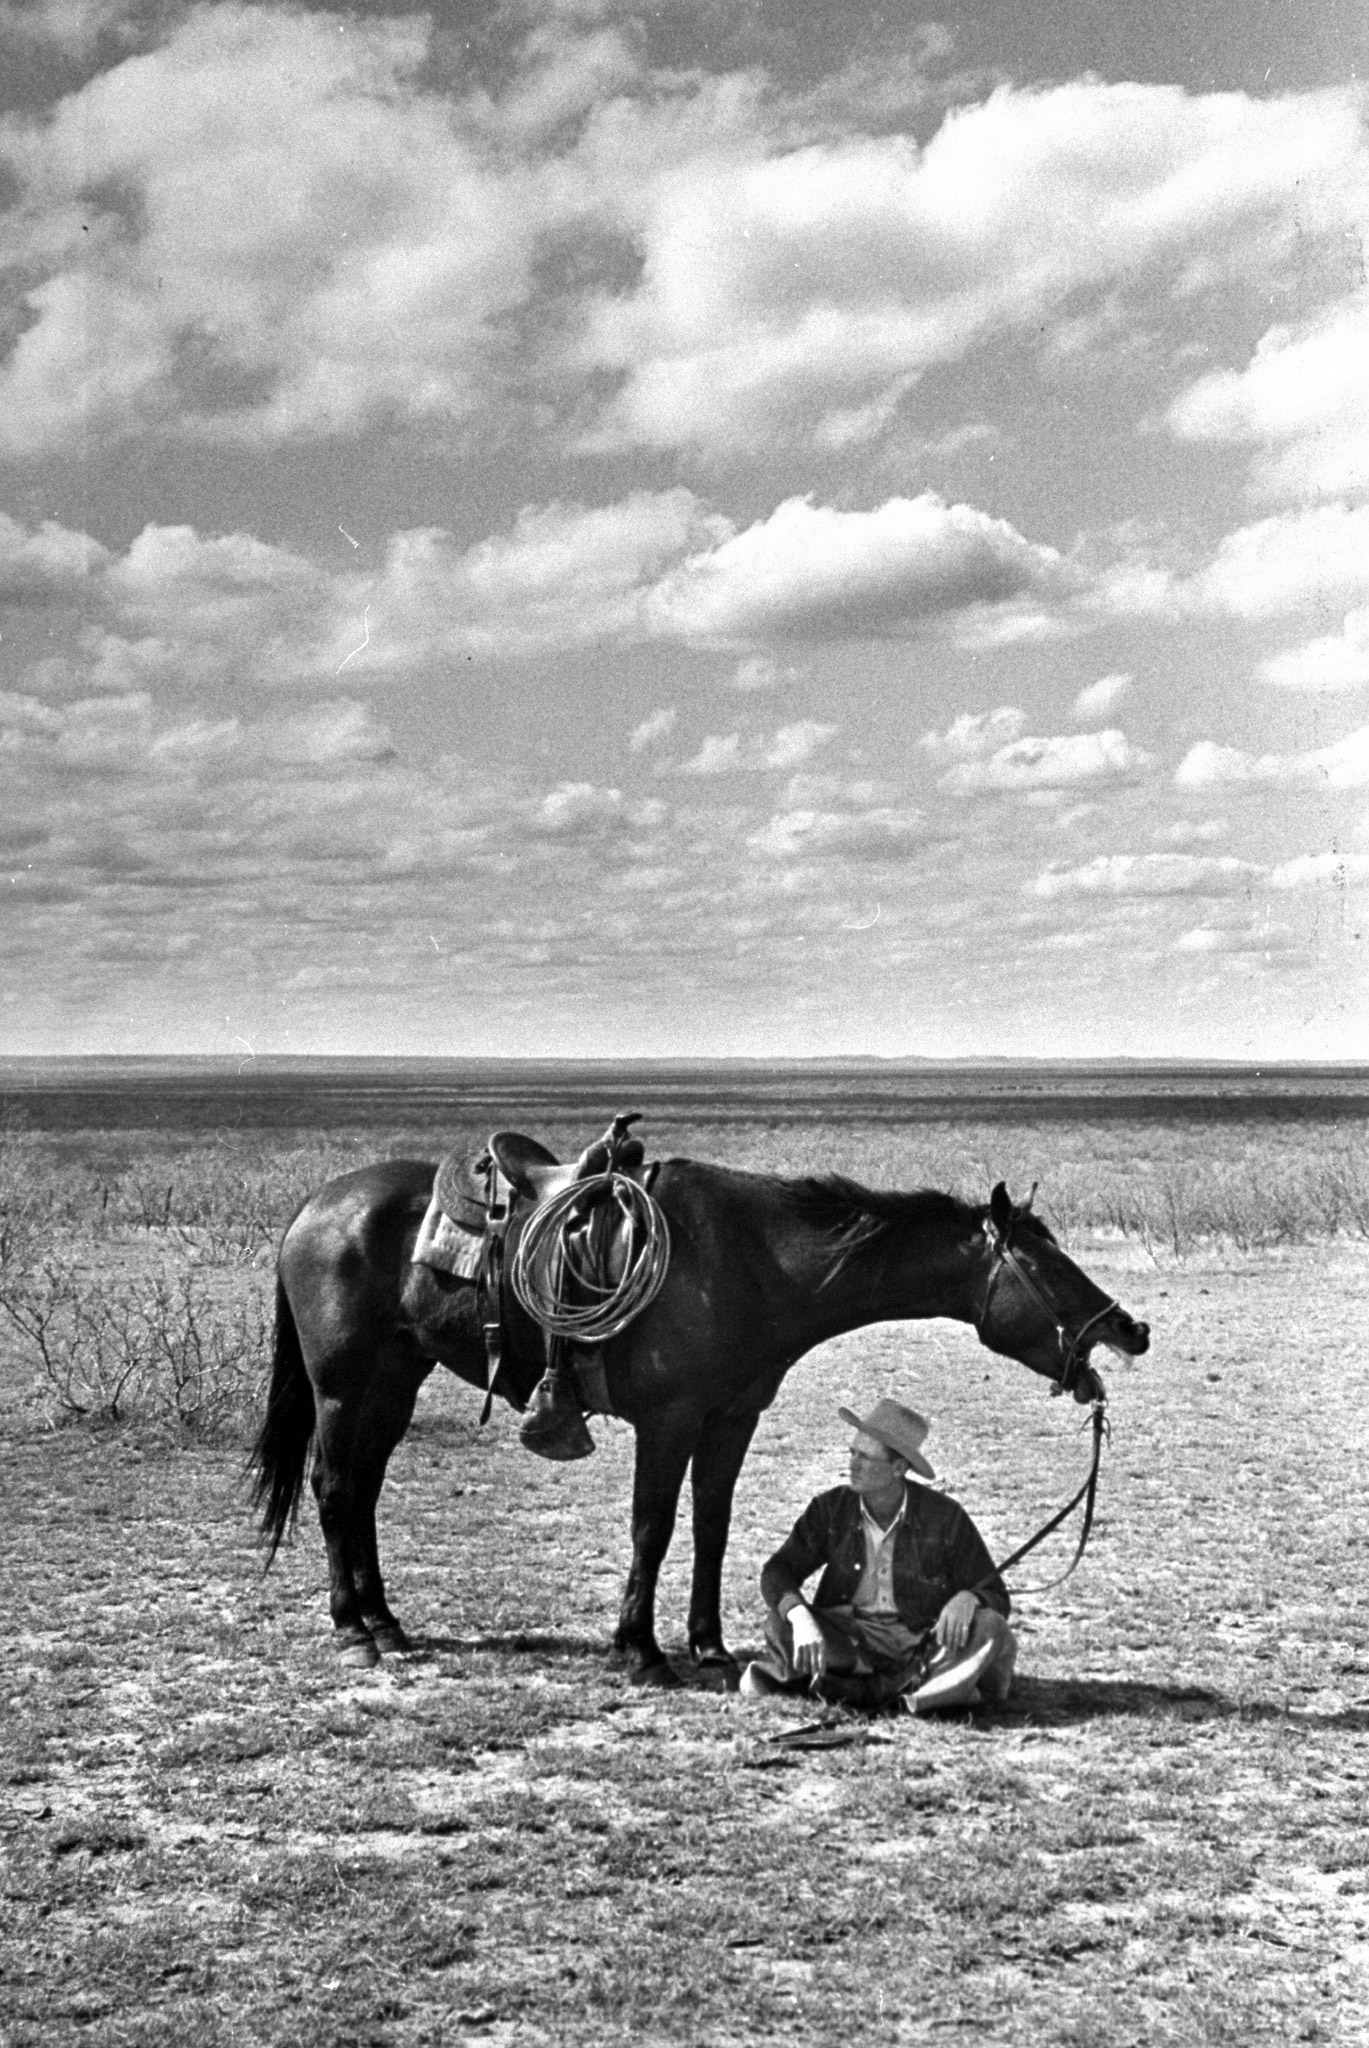 Foreman of the JA Ranch Clarence Hailey Long sitting in shade of his horse on prairie, 1949.